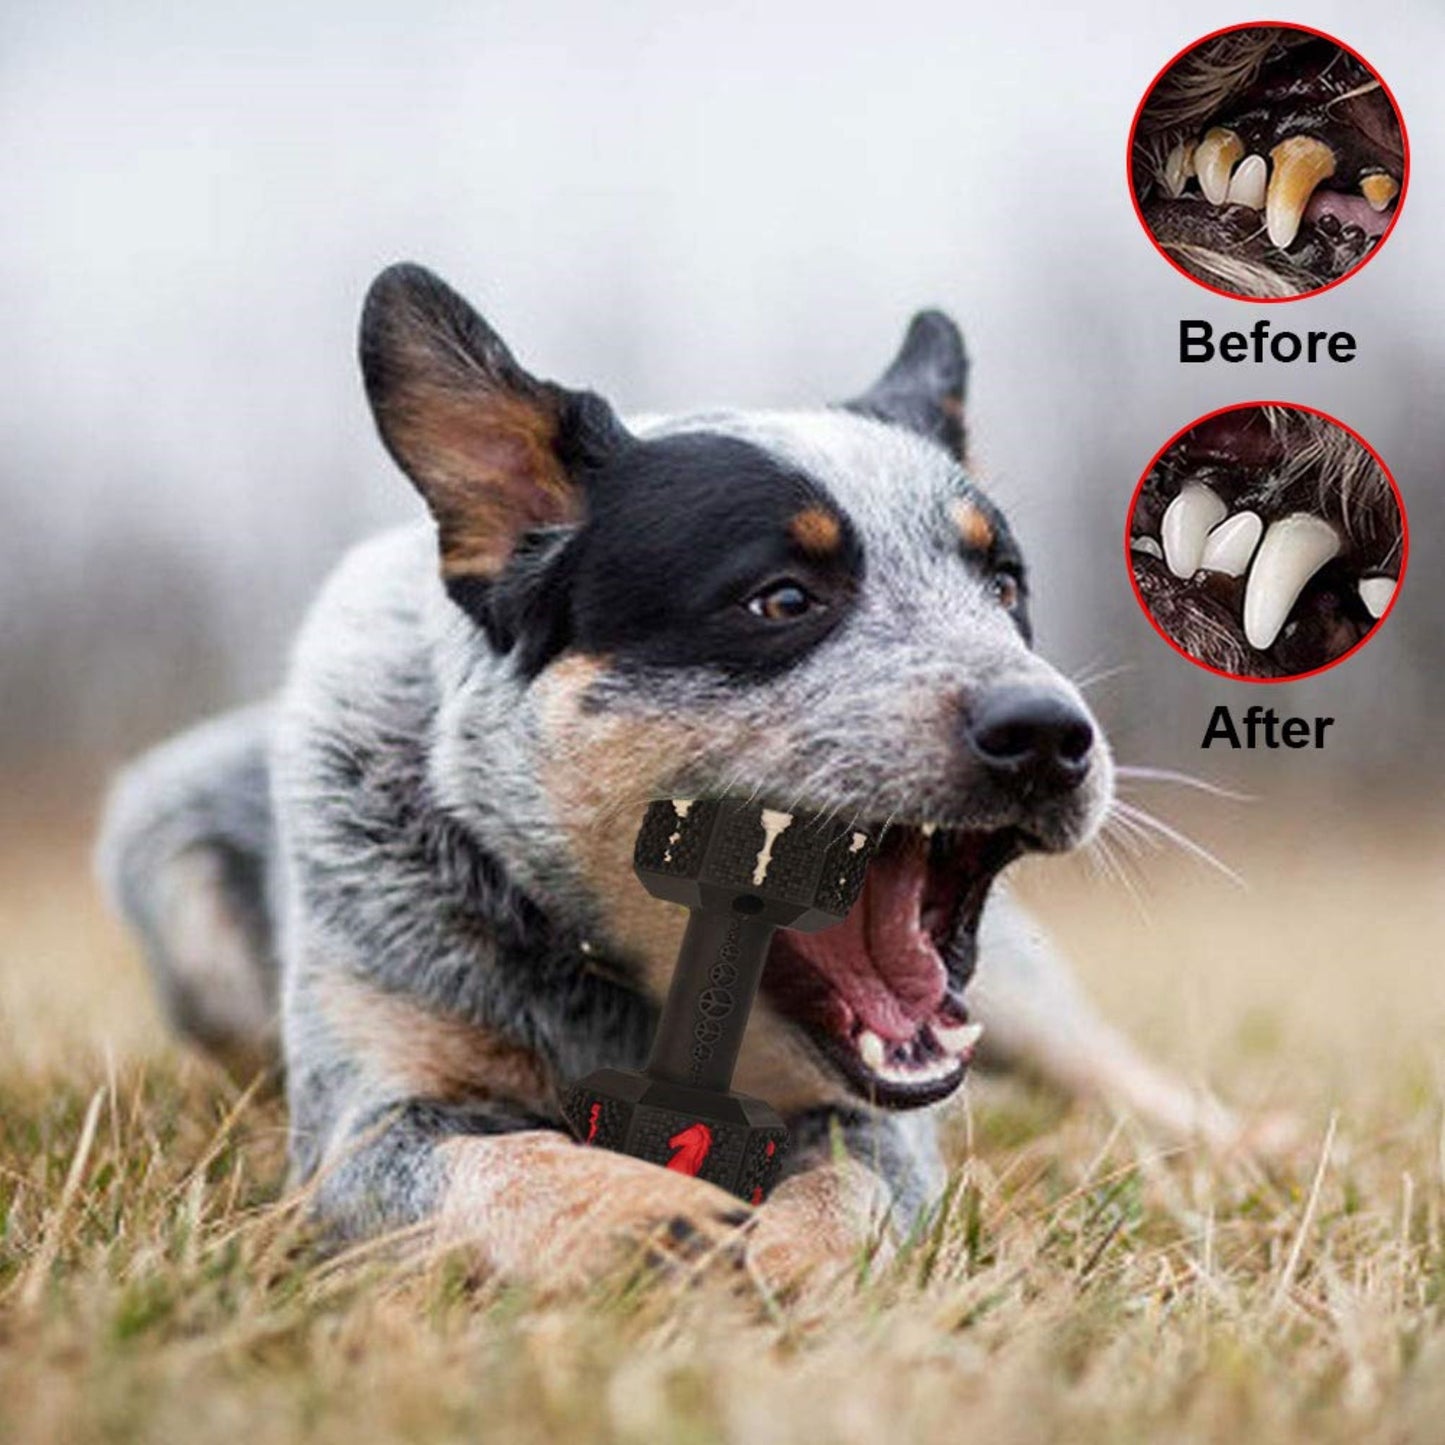 ROYAL PETS USA Indestructible, Durable & Tough Dumbell Dog Chew Toy for Aggressive Chewers. Slow Treat Dispensing Interactive Toys for S, M & L Breed -100% NATURAL RUBBER -10000 BITES TESTED - UNIQUE DESIGN FOR ORAL CARE